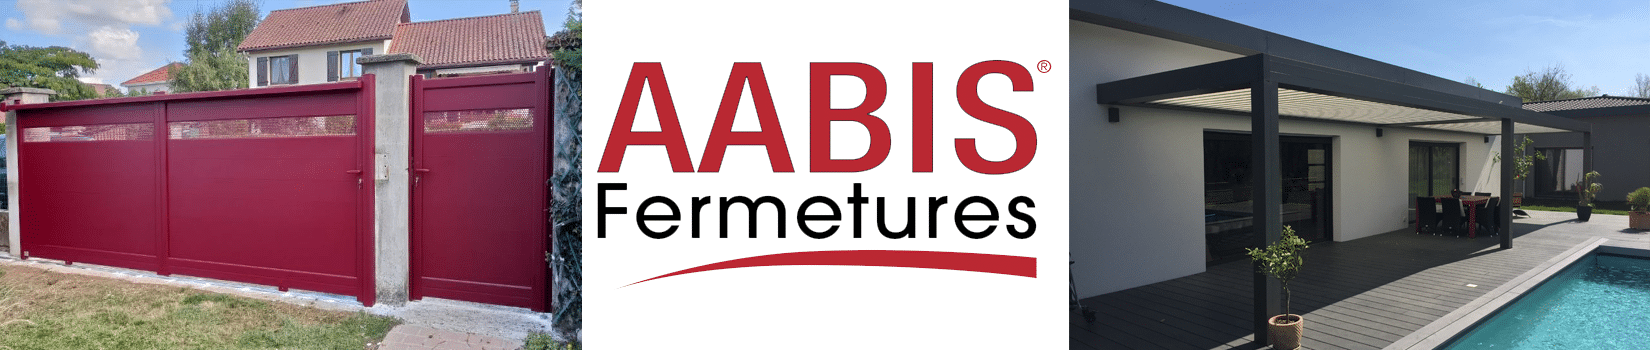 AABIS FERMETURES